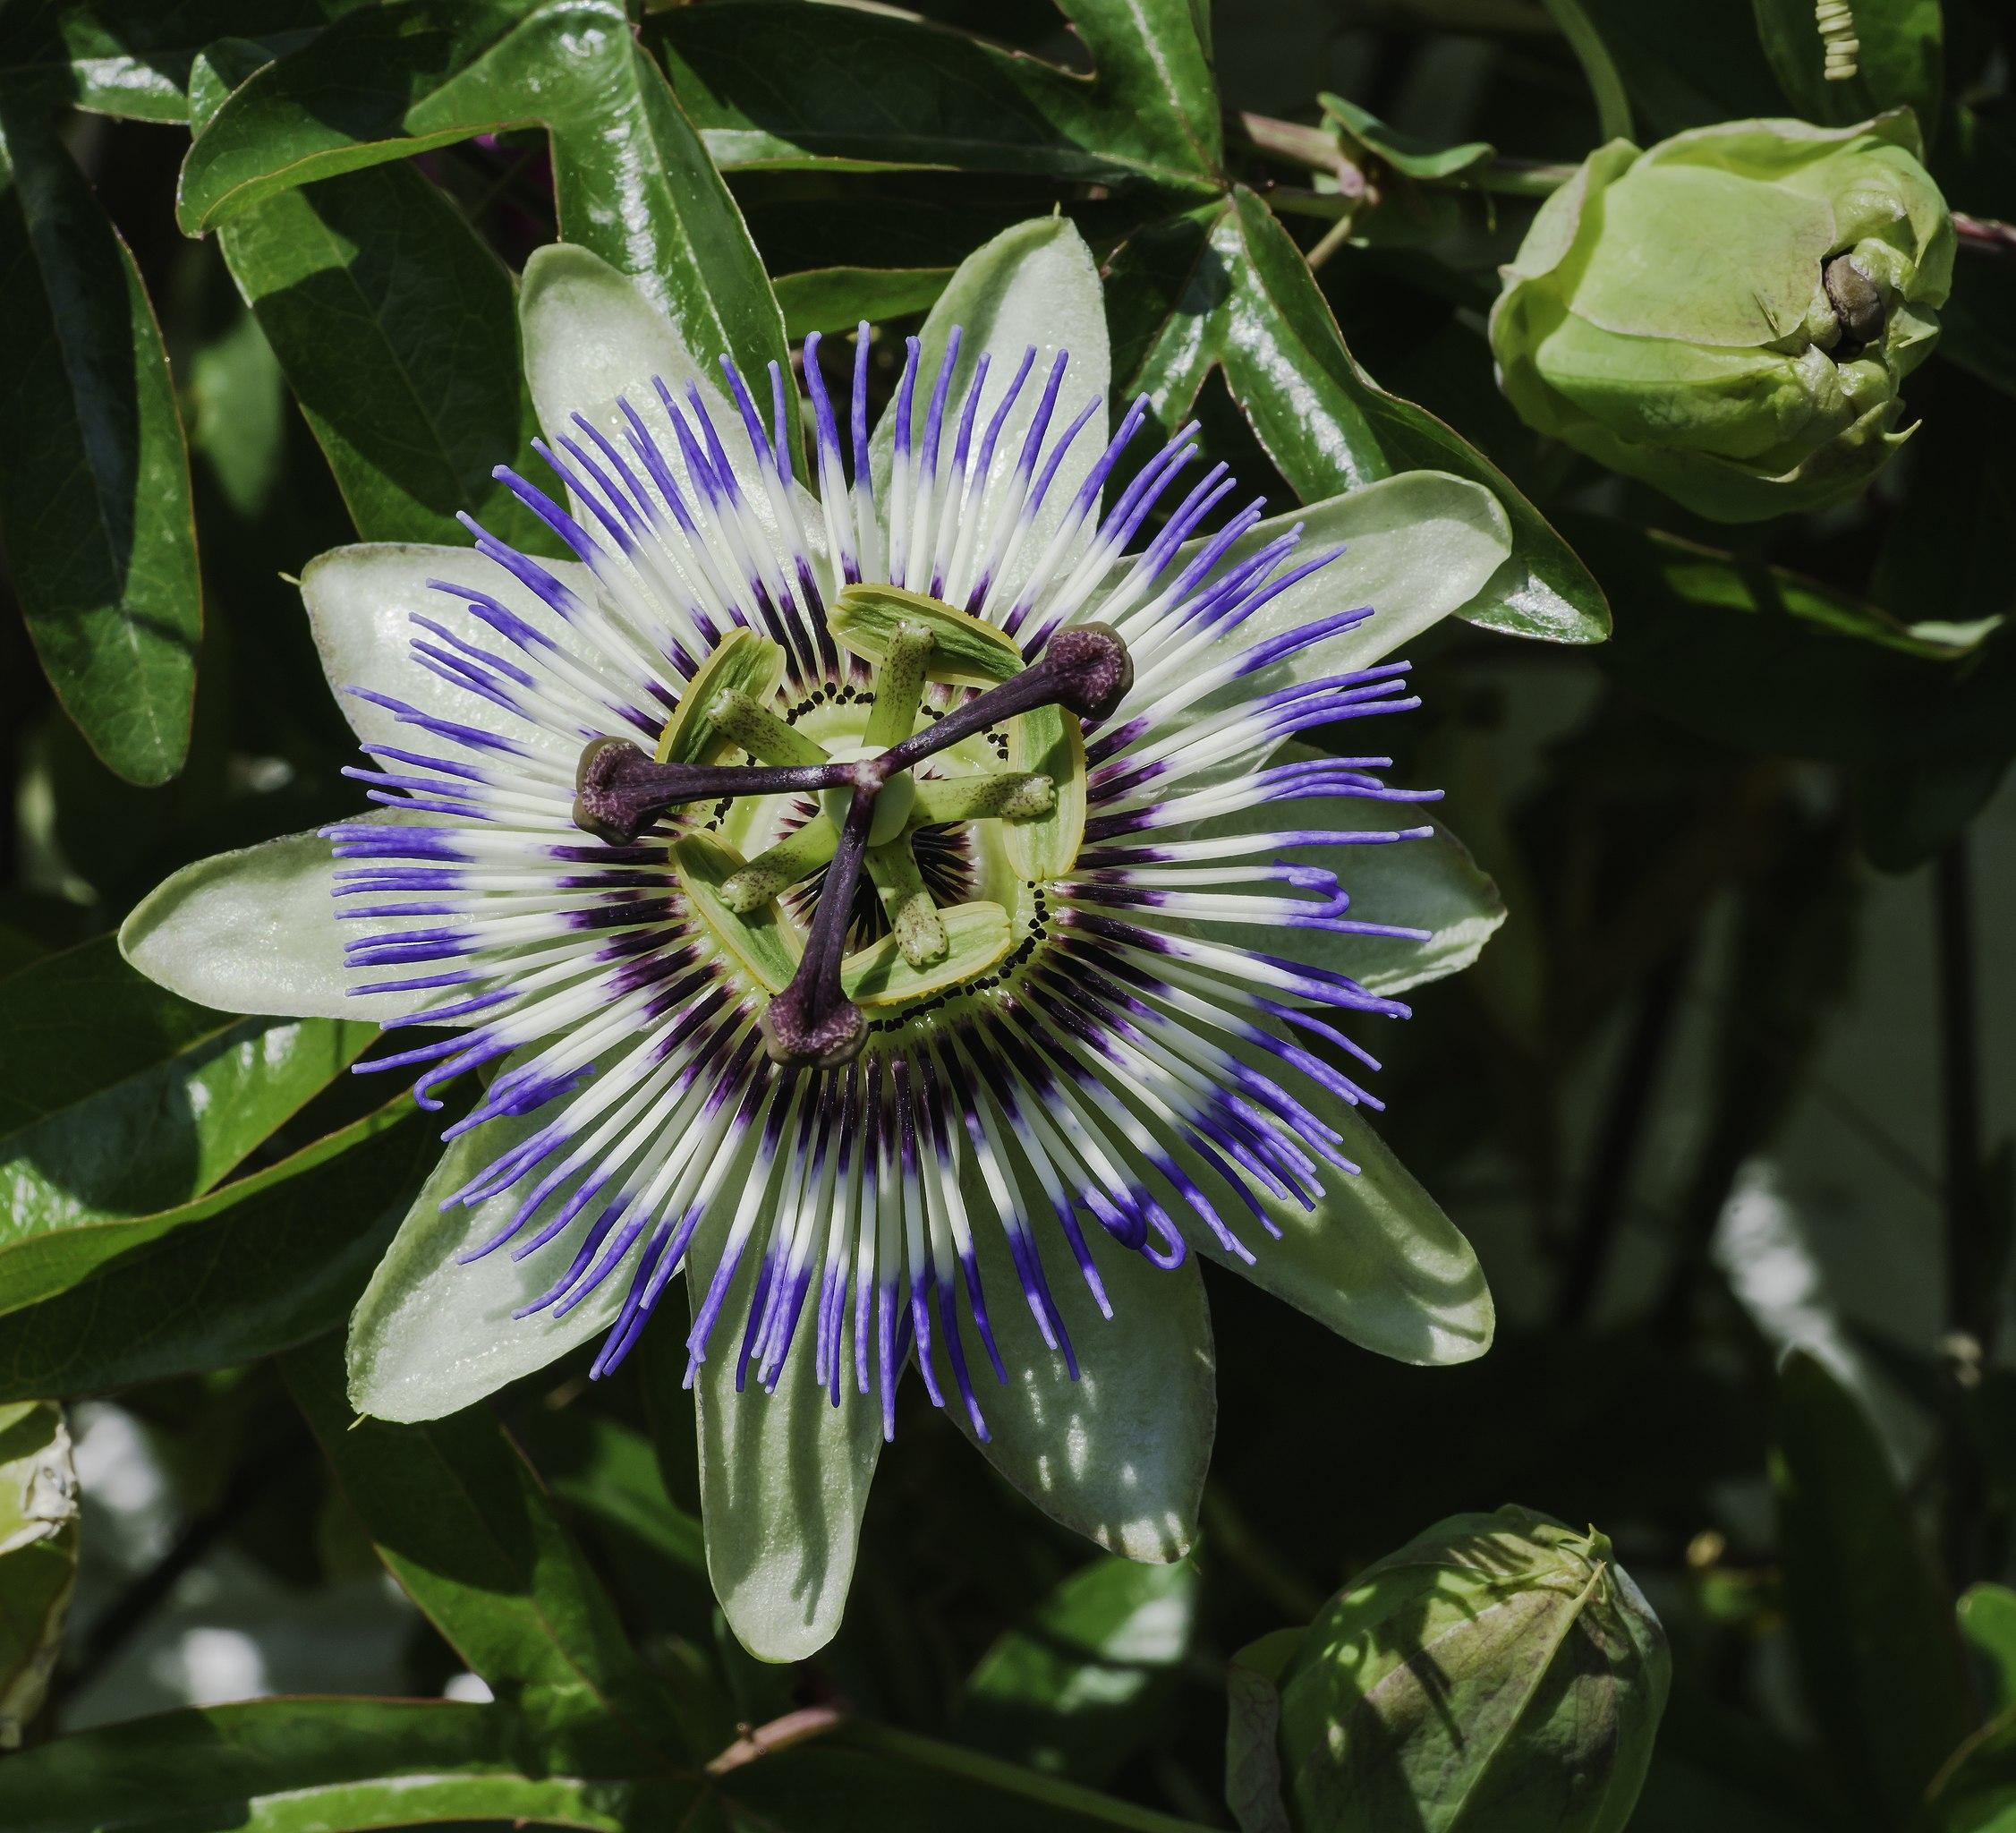 Blue-white flower with dark-purple center, purple-white stigma, and style, , yellow midrib,  lime-green stamen, lime-green ovary, sepals, green buds and leaves